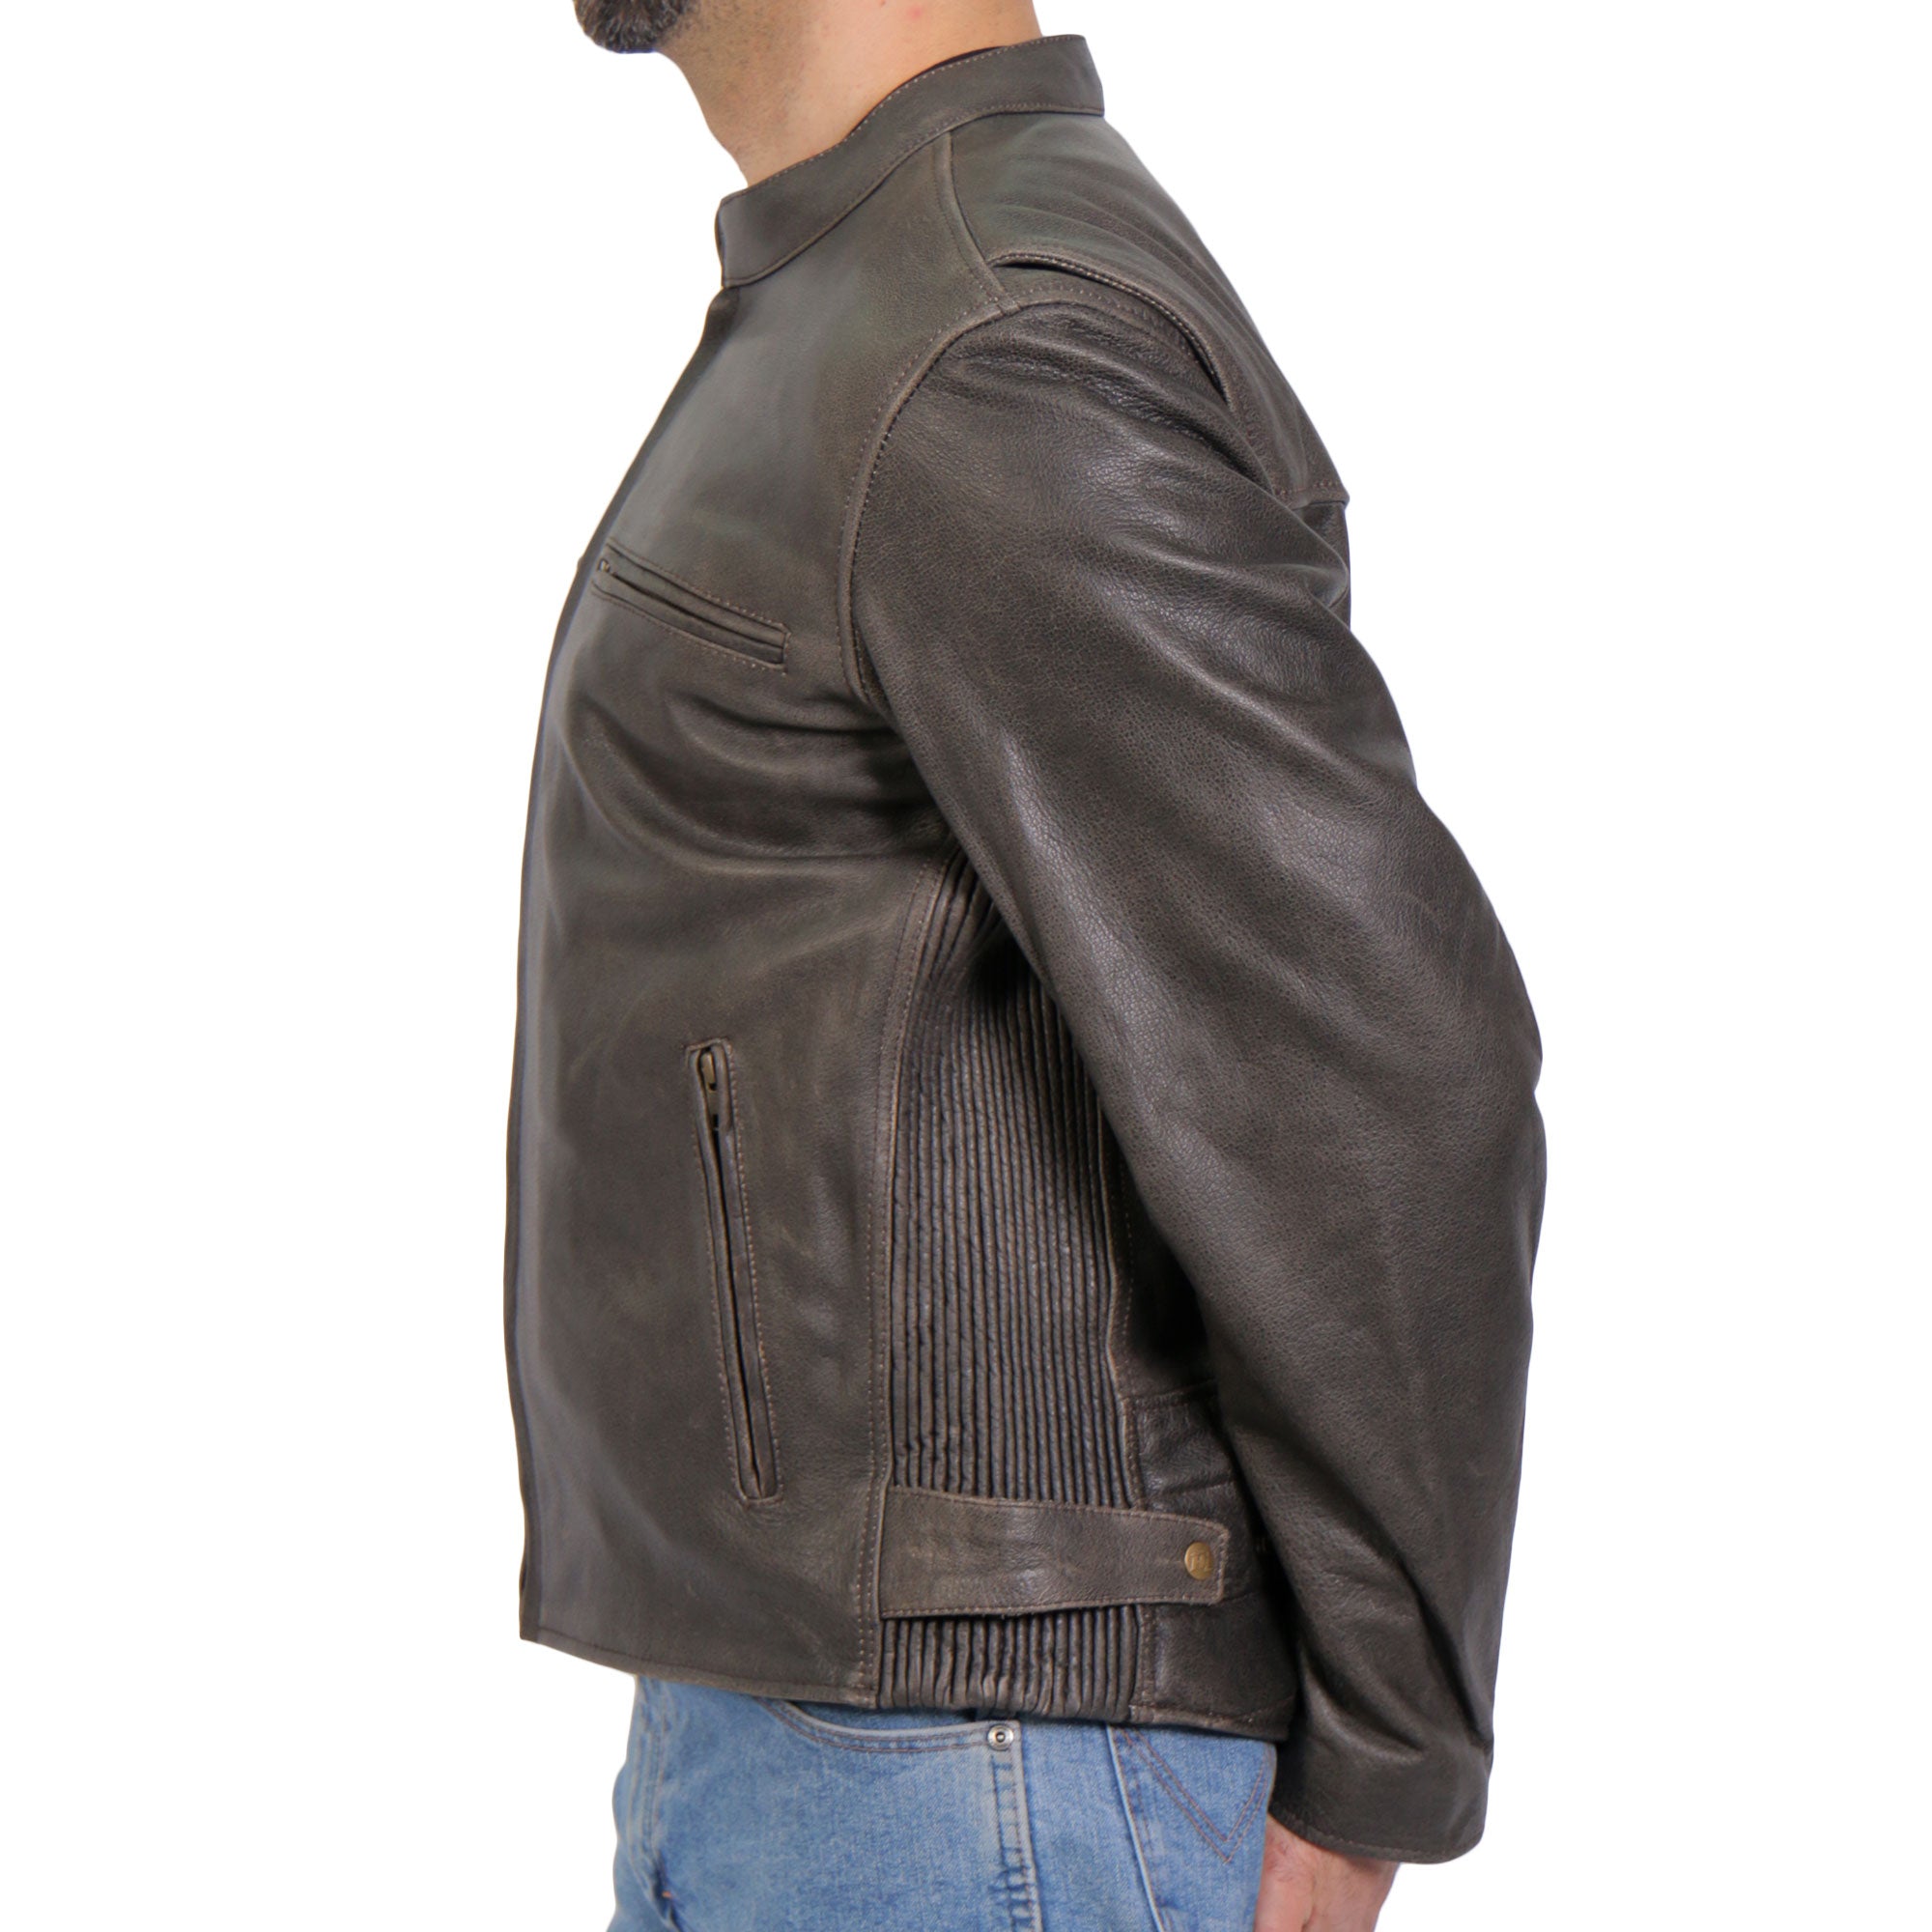 Hot Leathers JKM1029 Men’s Distress Brown Motorcycle style ‘Carry and Conceal’ Leather Biker Jacket